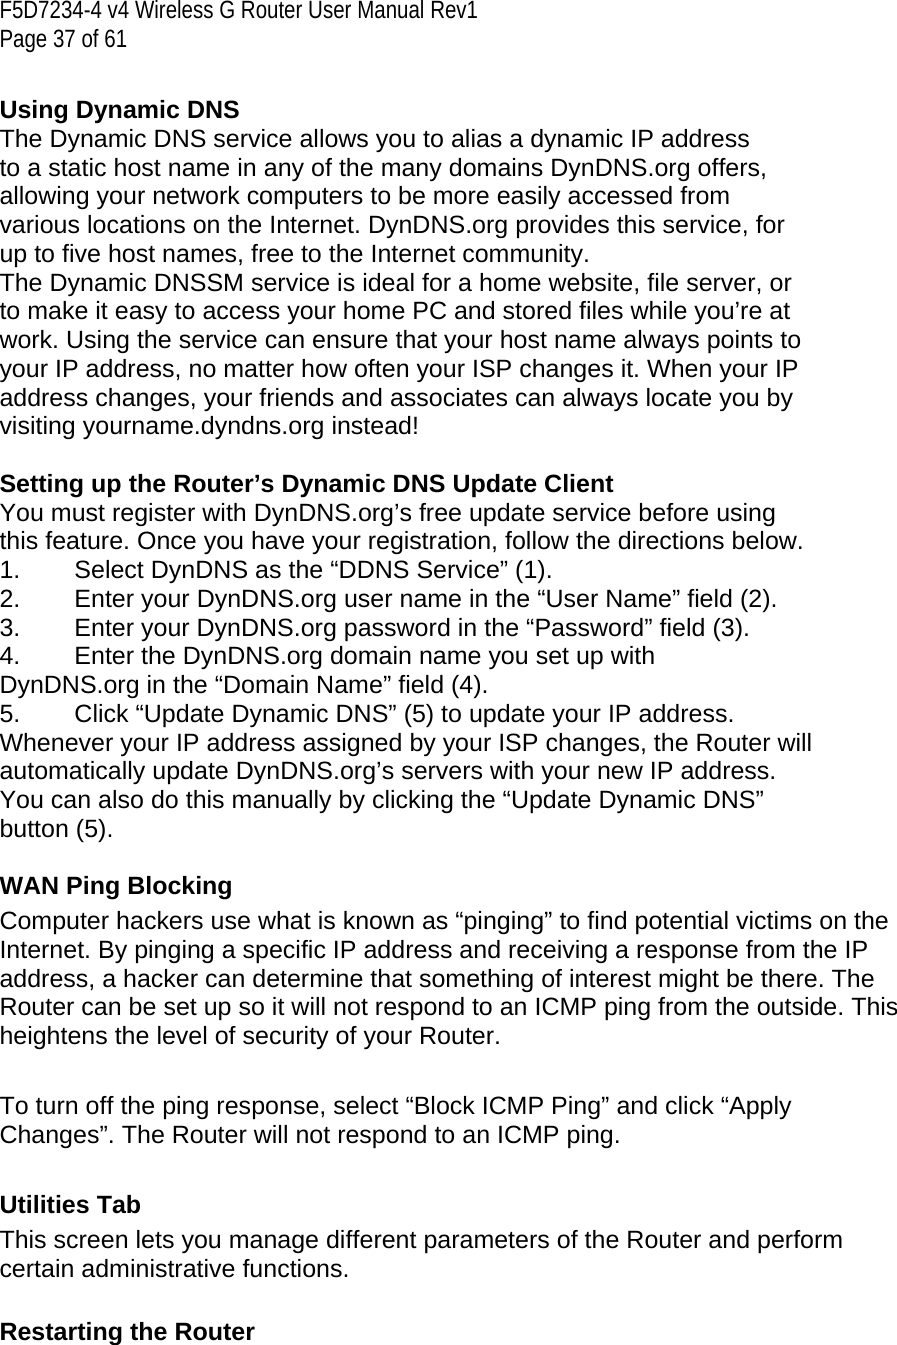 F5D7234-4 v4 Wireless G Router User Manual Rev1  Page 37 of 61   Using Dynamic DNS The Dynamic DNS service allows you to alias a dynamic IP address to a static host name in any of the many domains DynDNS.org offers, allowing your network computers to be more easily accessed from various locations on the Internet. DynDNS.org provides this service, for up to five host names, free to the Internet community. The Dynamic DNSSM service is ideal for a home website, file server, or to make it easy to access your home PC and stored files while you’re at work. Using the service can ensure that your host name always points to your IP address, no matter how often your ISP changes it. When your IP address changes, your friends and associates can always locate you by visiting yourname.dyndns.org instead!  Setting up the Router’s Dynamic DNS Update Client You must register with DynDNS.org’s free update service before using this feature. Once you have your registration, follow the directions below. 1.  Select DynDNS as the “DDNS Service” (1). 2.  Enter your DynDNS.org user name in the “User Name” field (2). 3.  Enter your DynDNS.org password in the “Password” field (3). 4.  Enter the DynDNS.org domain name you set up with DynDNS.org in the “Domain Name” field (4). 5.  Click “Update Dynamic DNS” (5) to update your IP address. Whenever your IP address assigned by your ISP changes, the Router will automatically update DynDNS.org’s servers with your new IP address. You can also do this manually by clicking the “Update Dynamic DNS” button (5).  WAN Ping Blocking Computer hackers use what is known as “pinging” to find potential victims on the Internet. By pinging a specific IP address and receiving a response from the IP address, a hacker can determine that something of interest might be there. The Router can be set up so it will not respond to an ICMP ping from the outside. This heightens the level of security of your Router.   To turn off the ping response, select “Block ICMP Ping” and click “Apply Changes”. The Router will not respond to an ICMP ping.   Utilities Tab This screen lets you manage different parameters of the Router and perform certain administrative functions.   Restarting the Router 